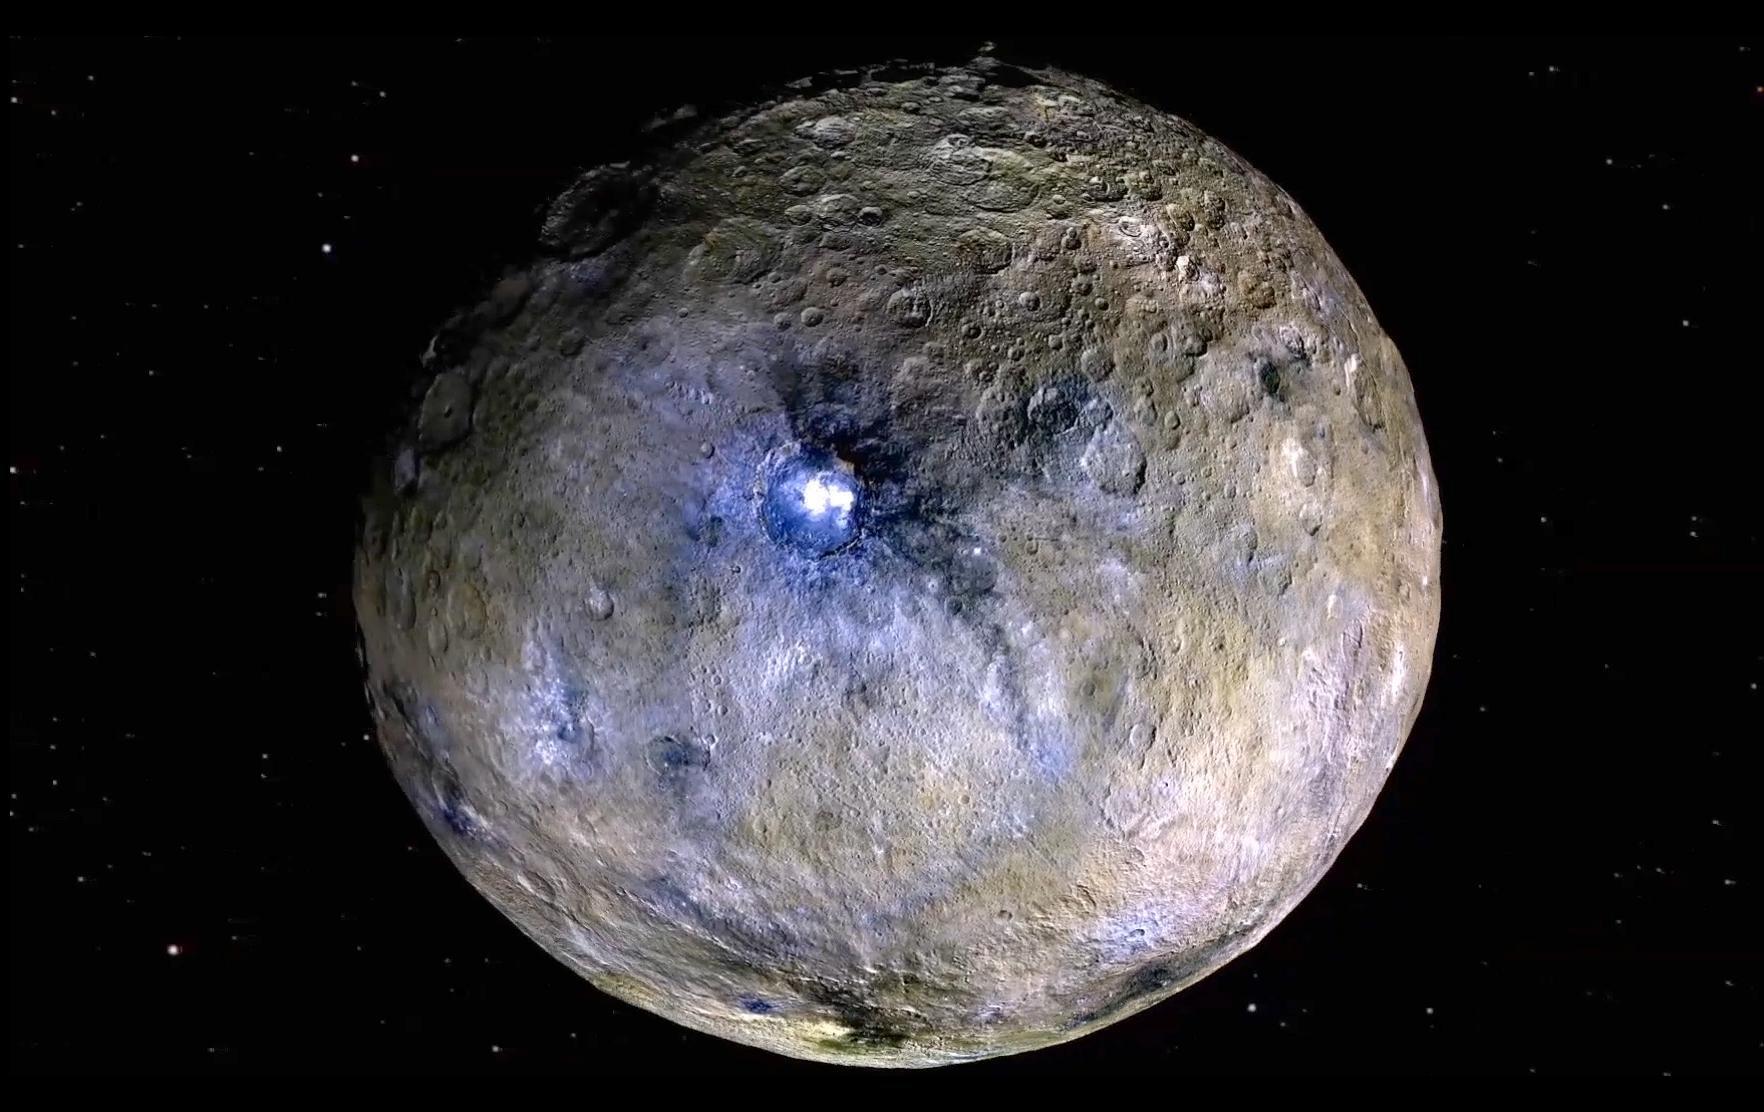 Full disk view of Ceres